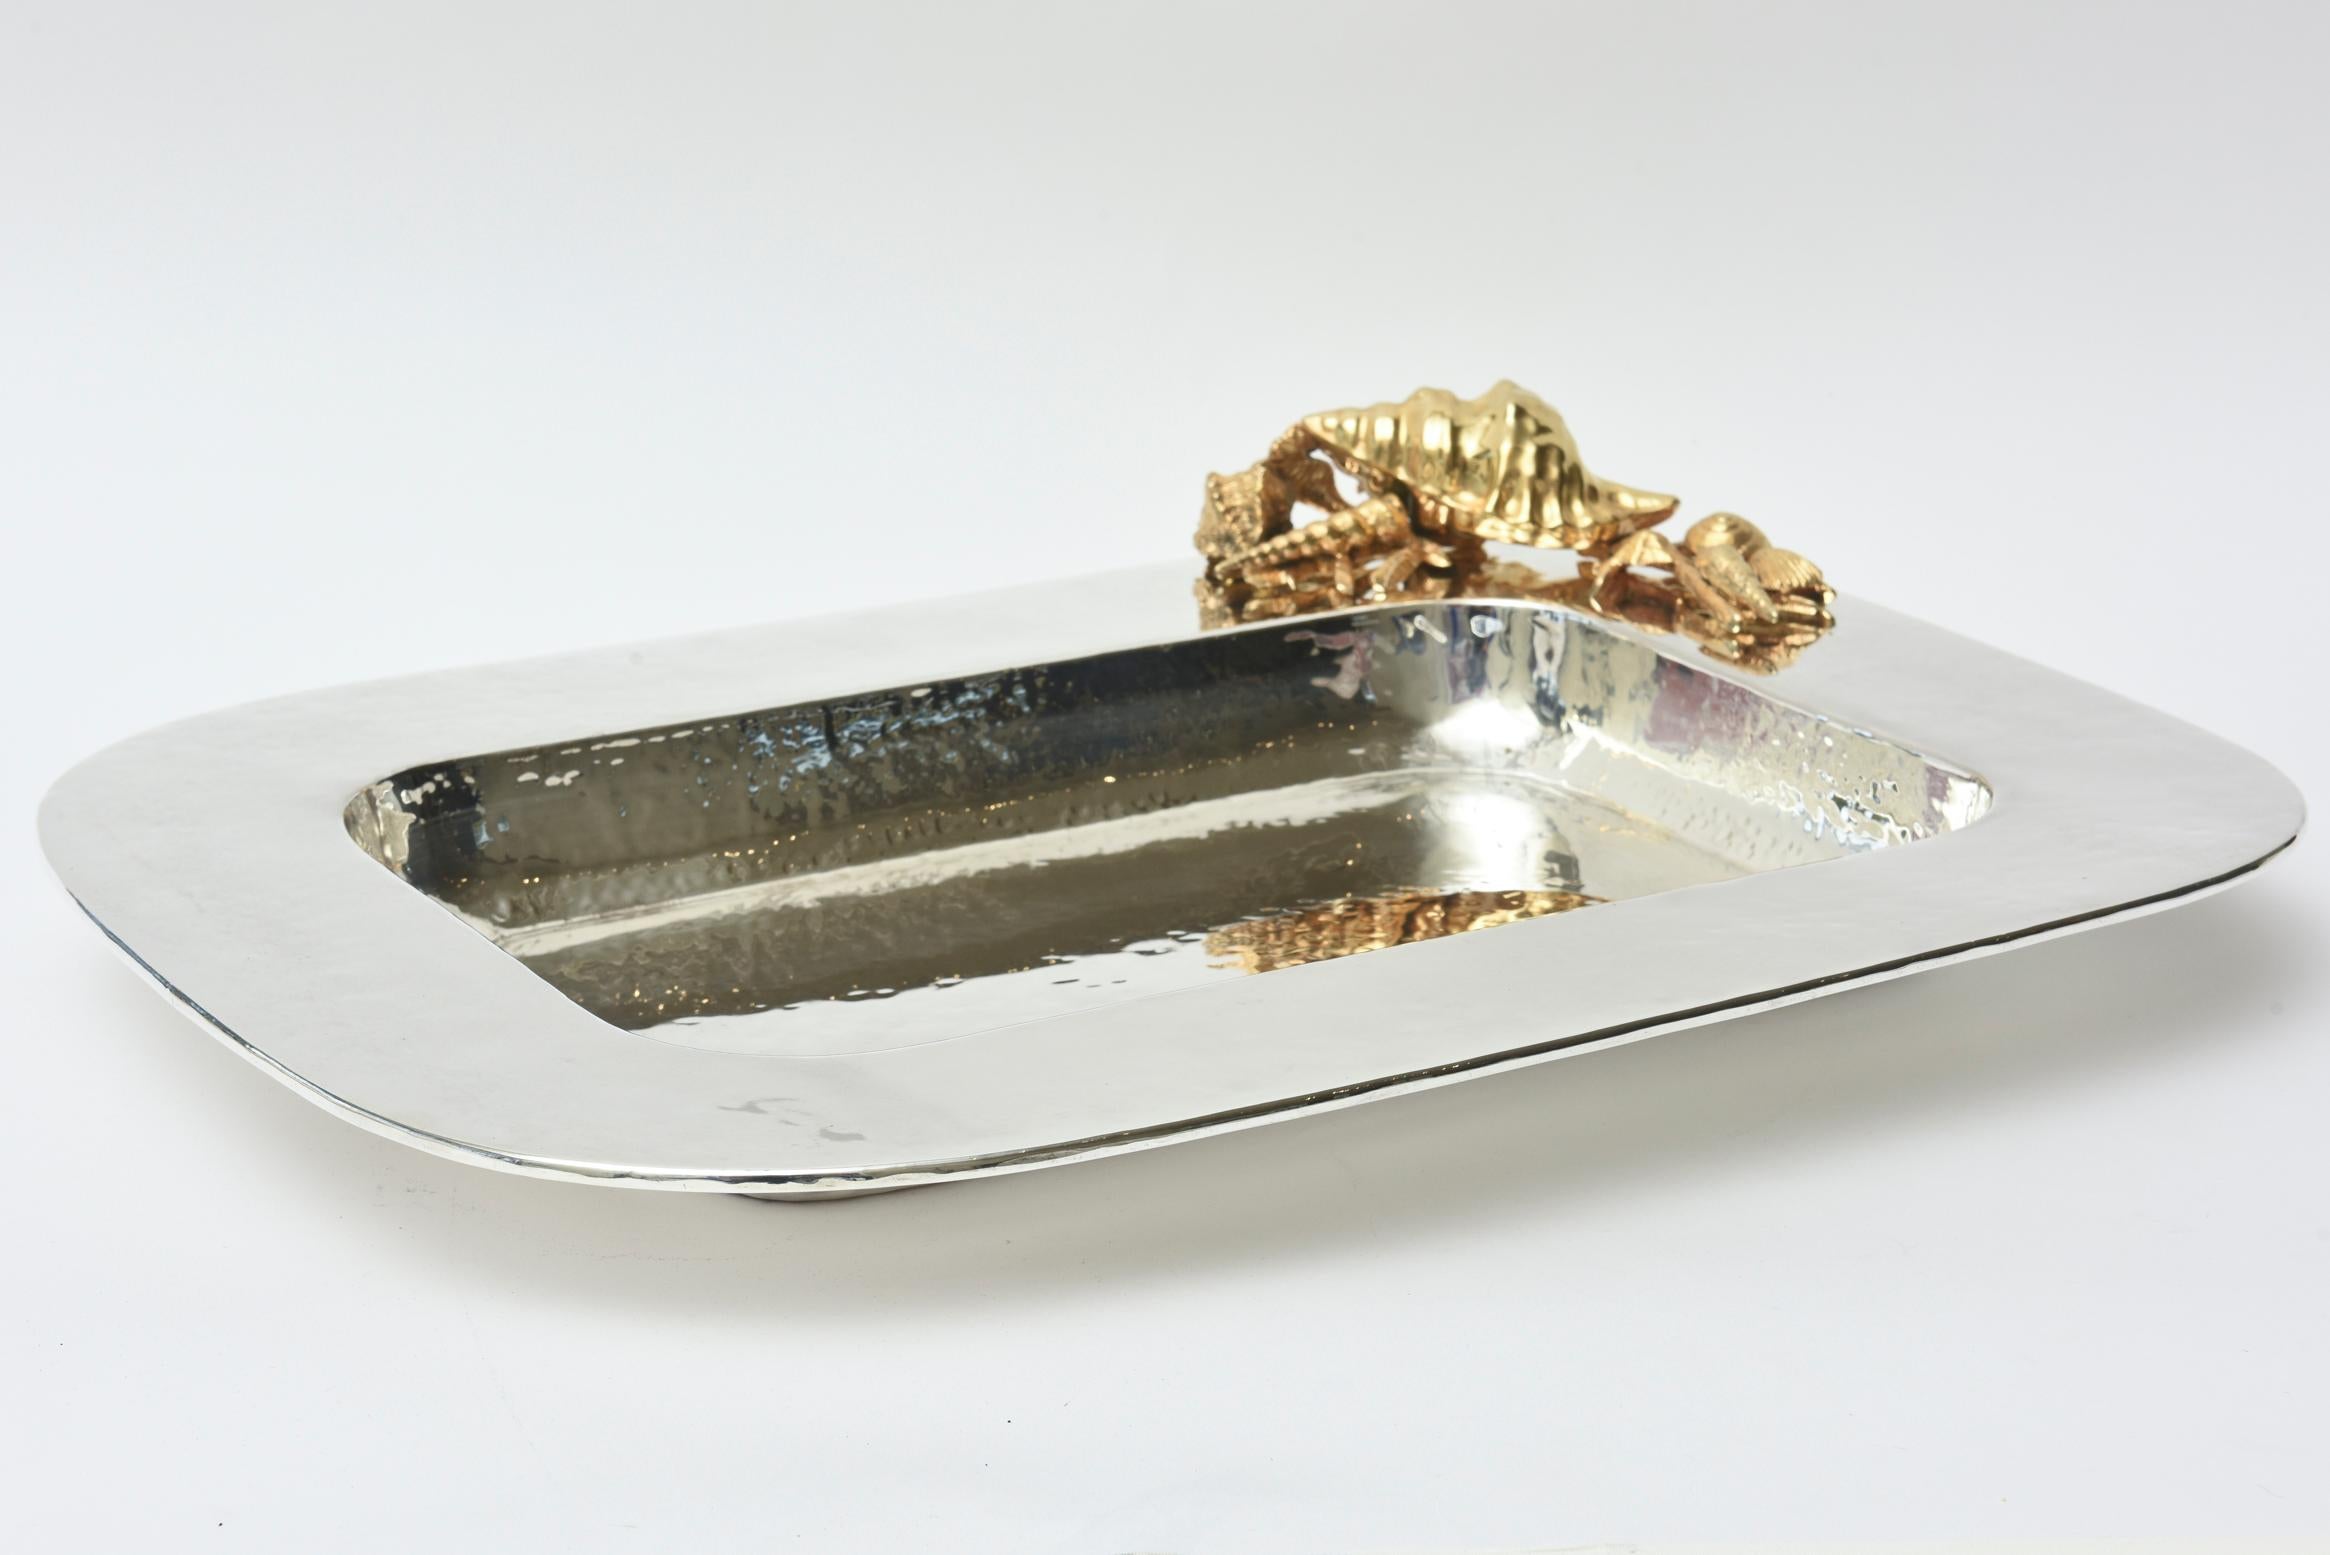 This stunning hand-hammered silver plate rectangular tray has embellishments on the top of one side in 24-carat gold-plated forms of assorted dimensional shells. It is signed but not legible even through a macro lens but looks like some form of